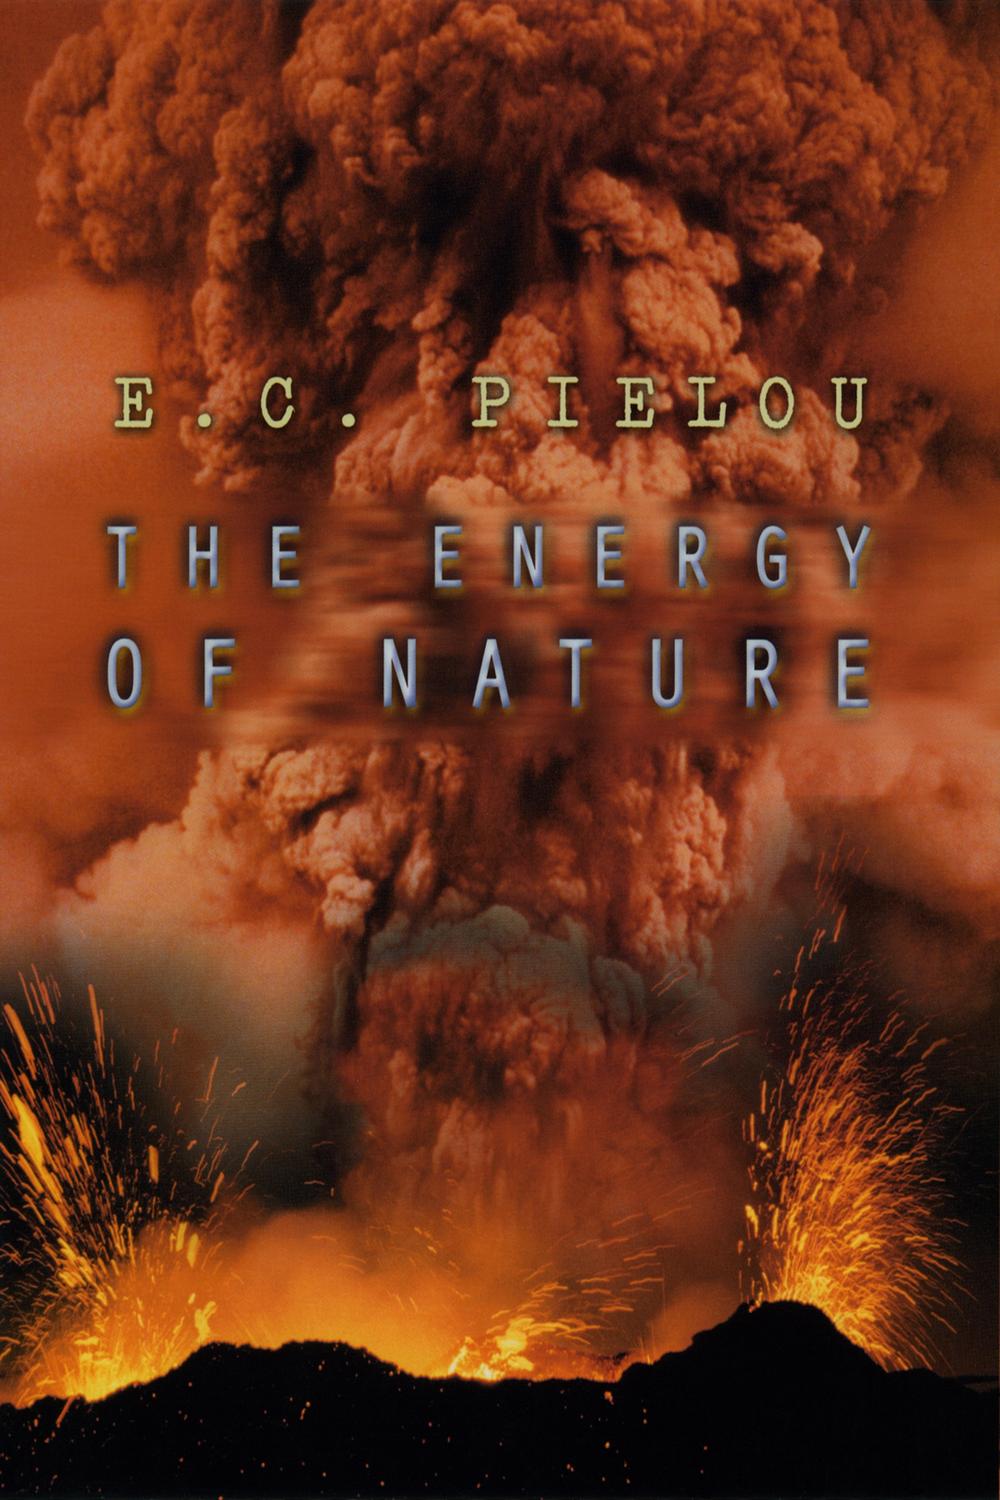 The Energy of Nature - E. C. Pielou